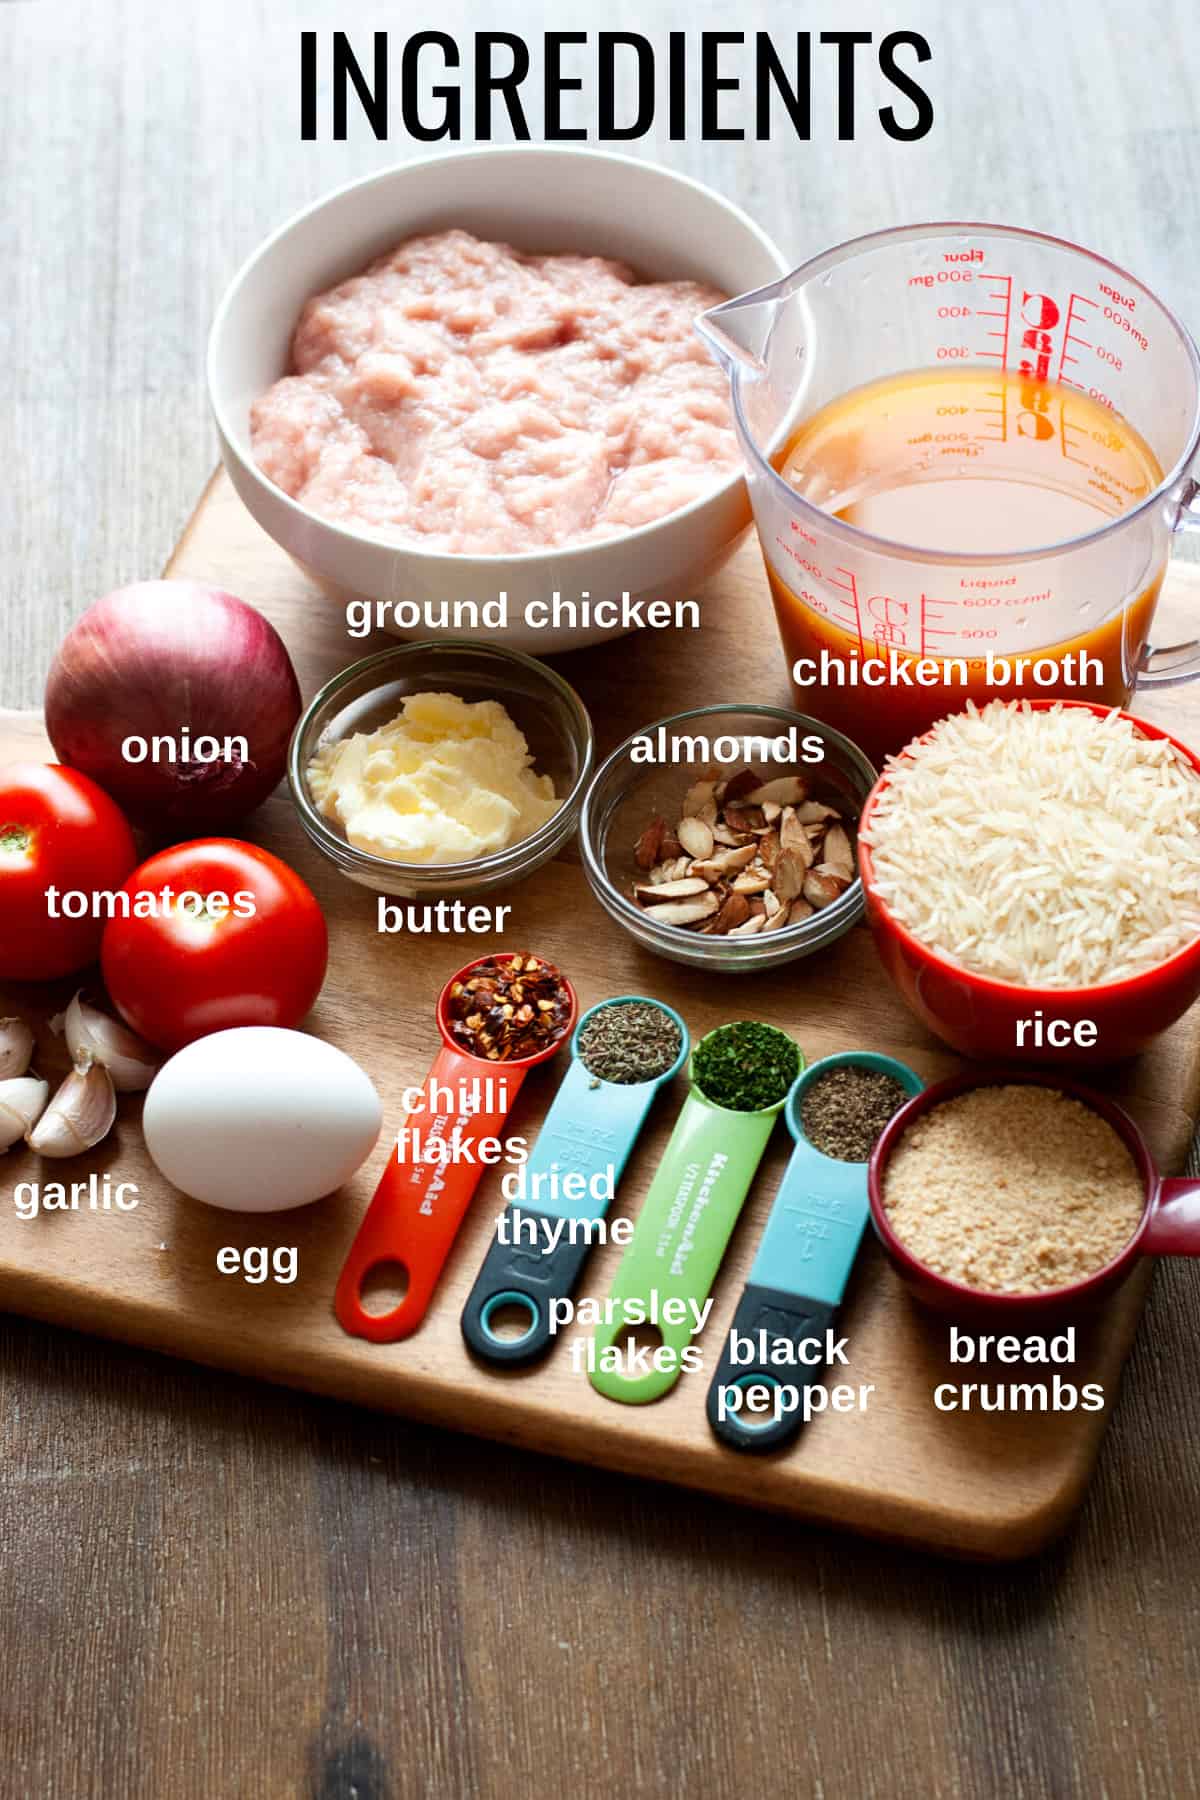 ingredients for meatballs and rice